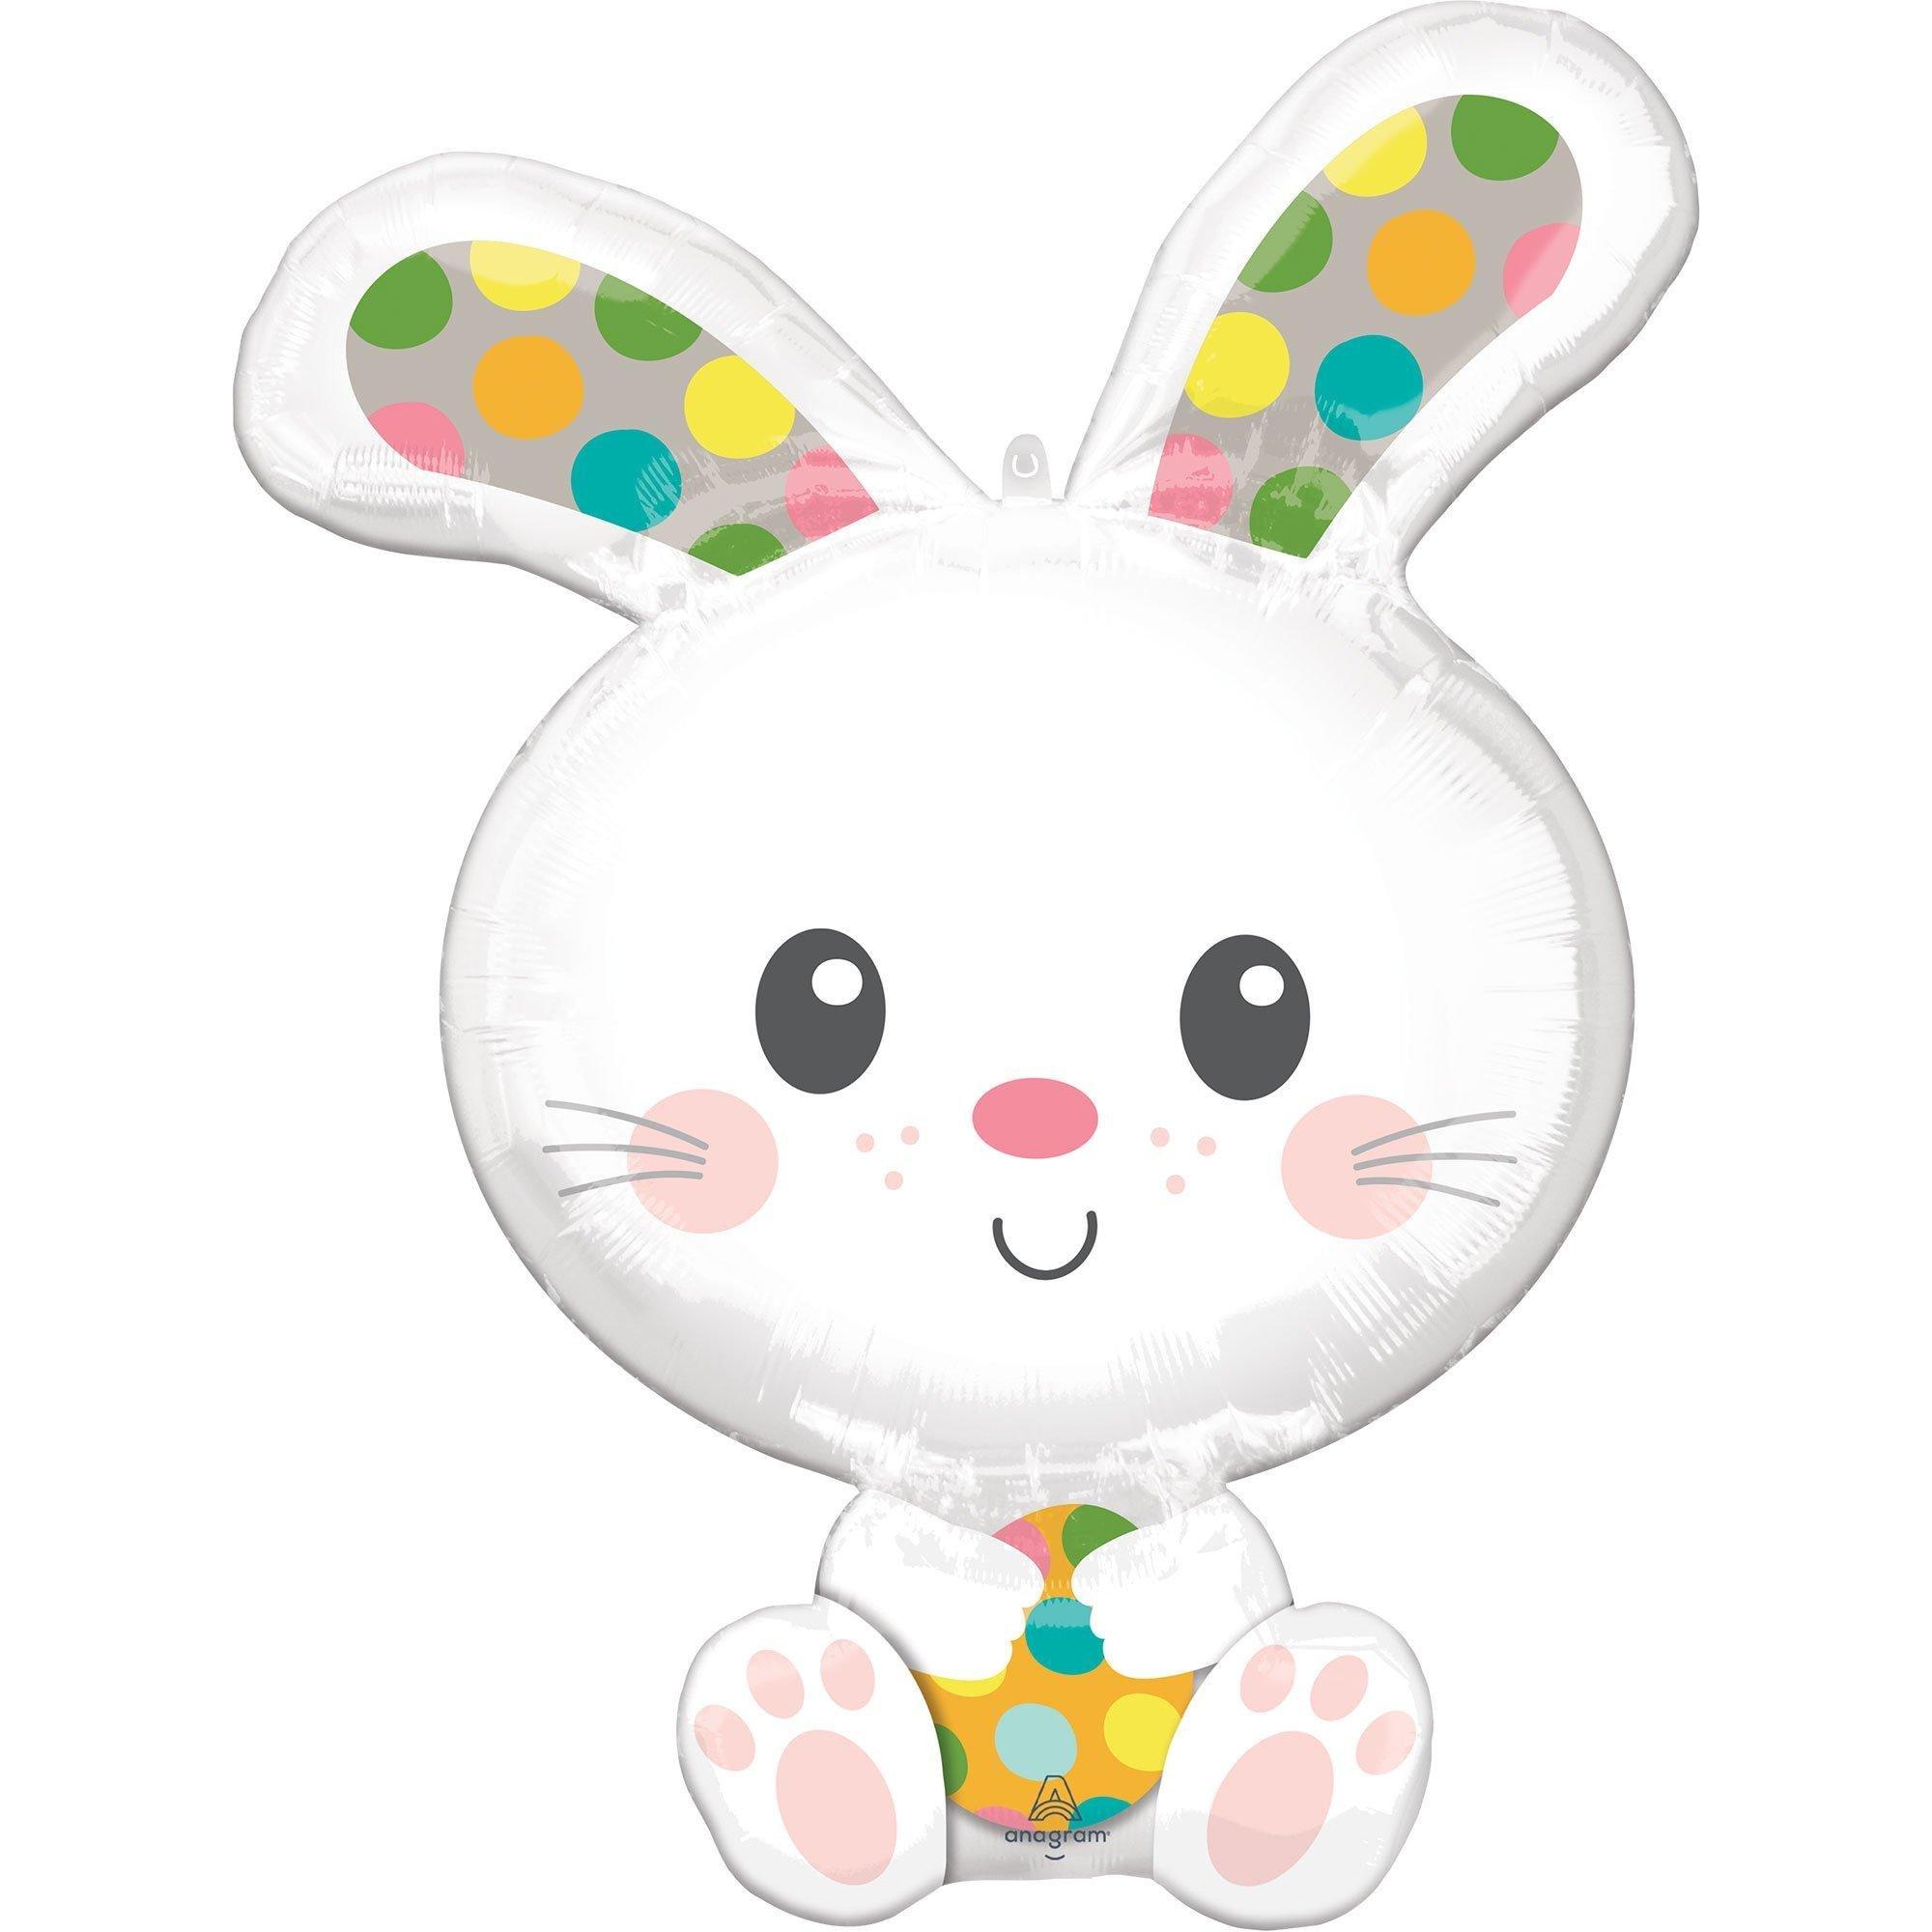 AirLoonz Spotted Easter Bunny Balloon Set, 4pc